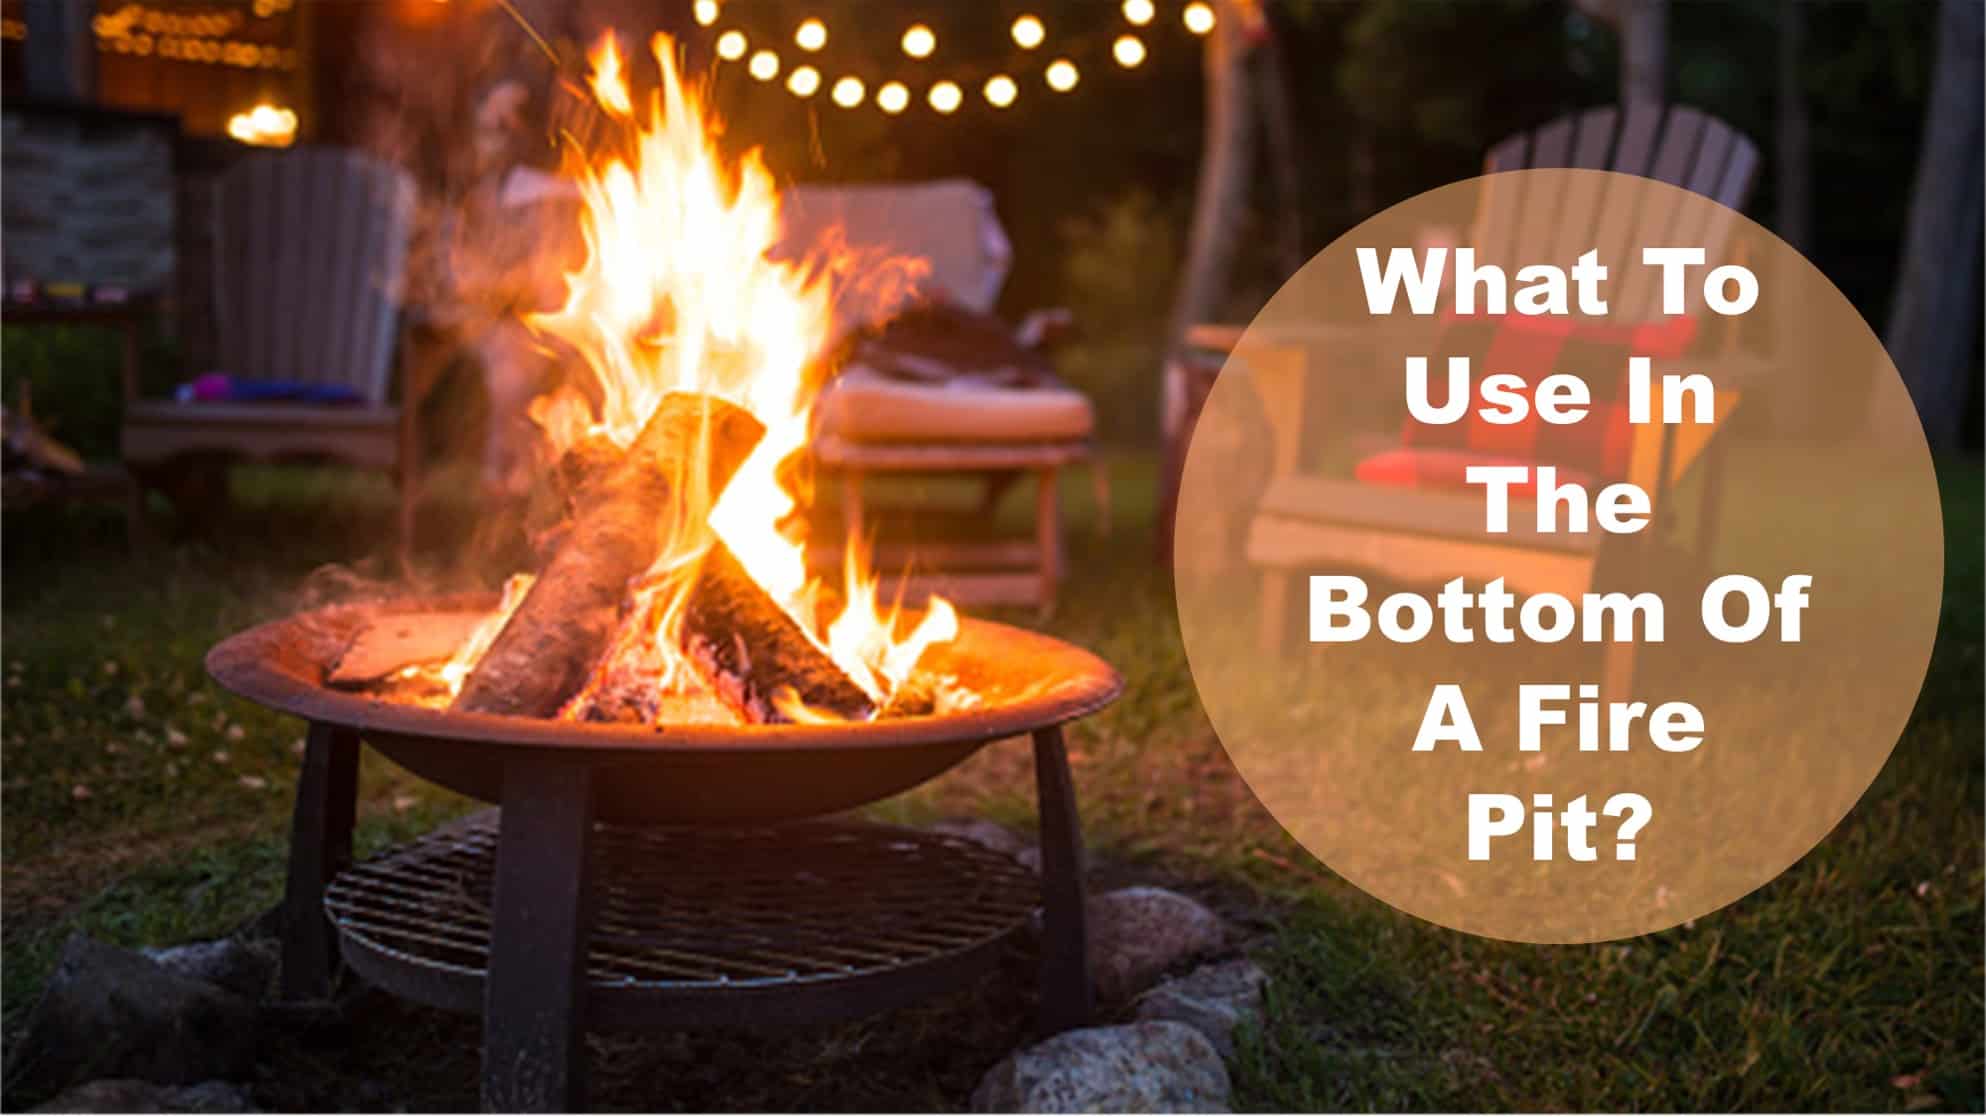 What To Use In The Bottom Of A Fire Pit, What Is The Best Material For A Fire Pit